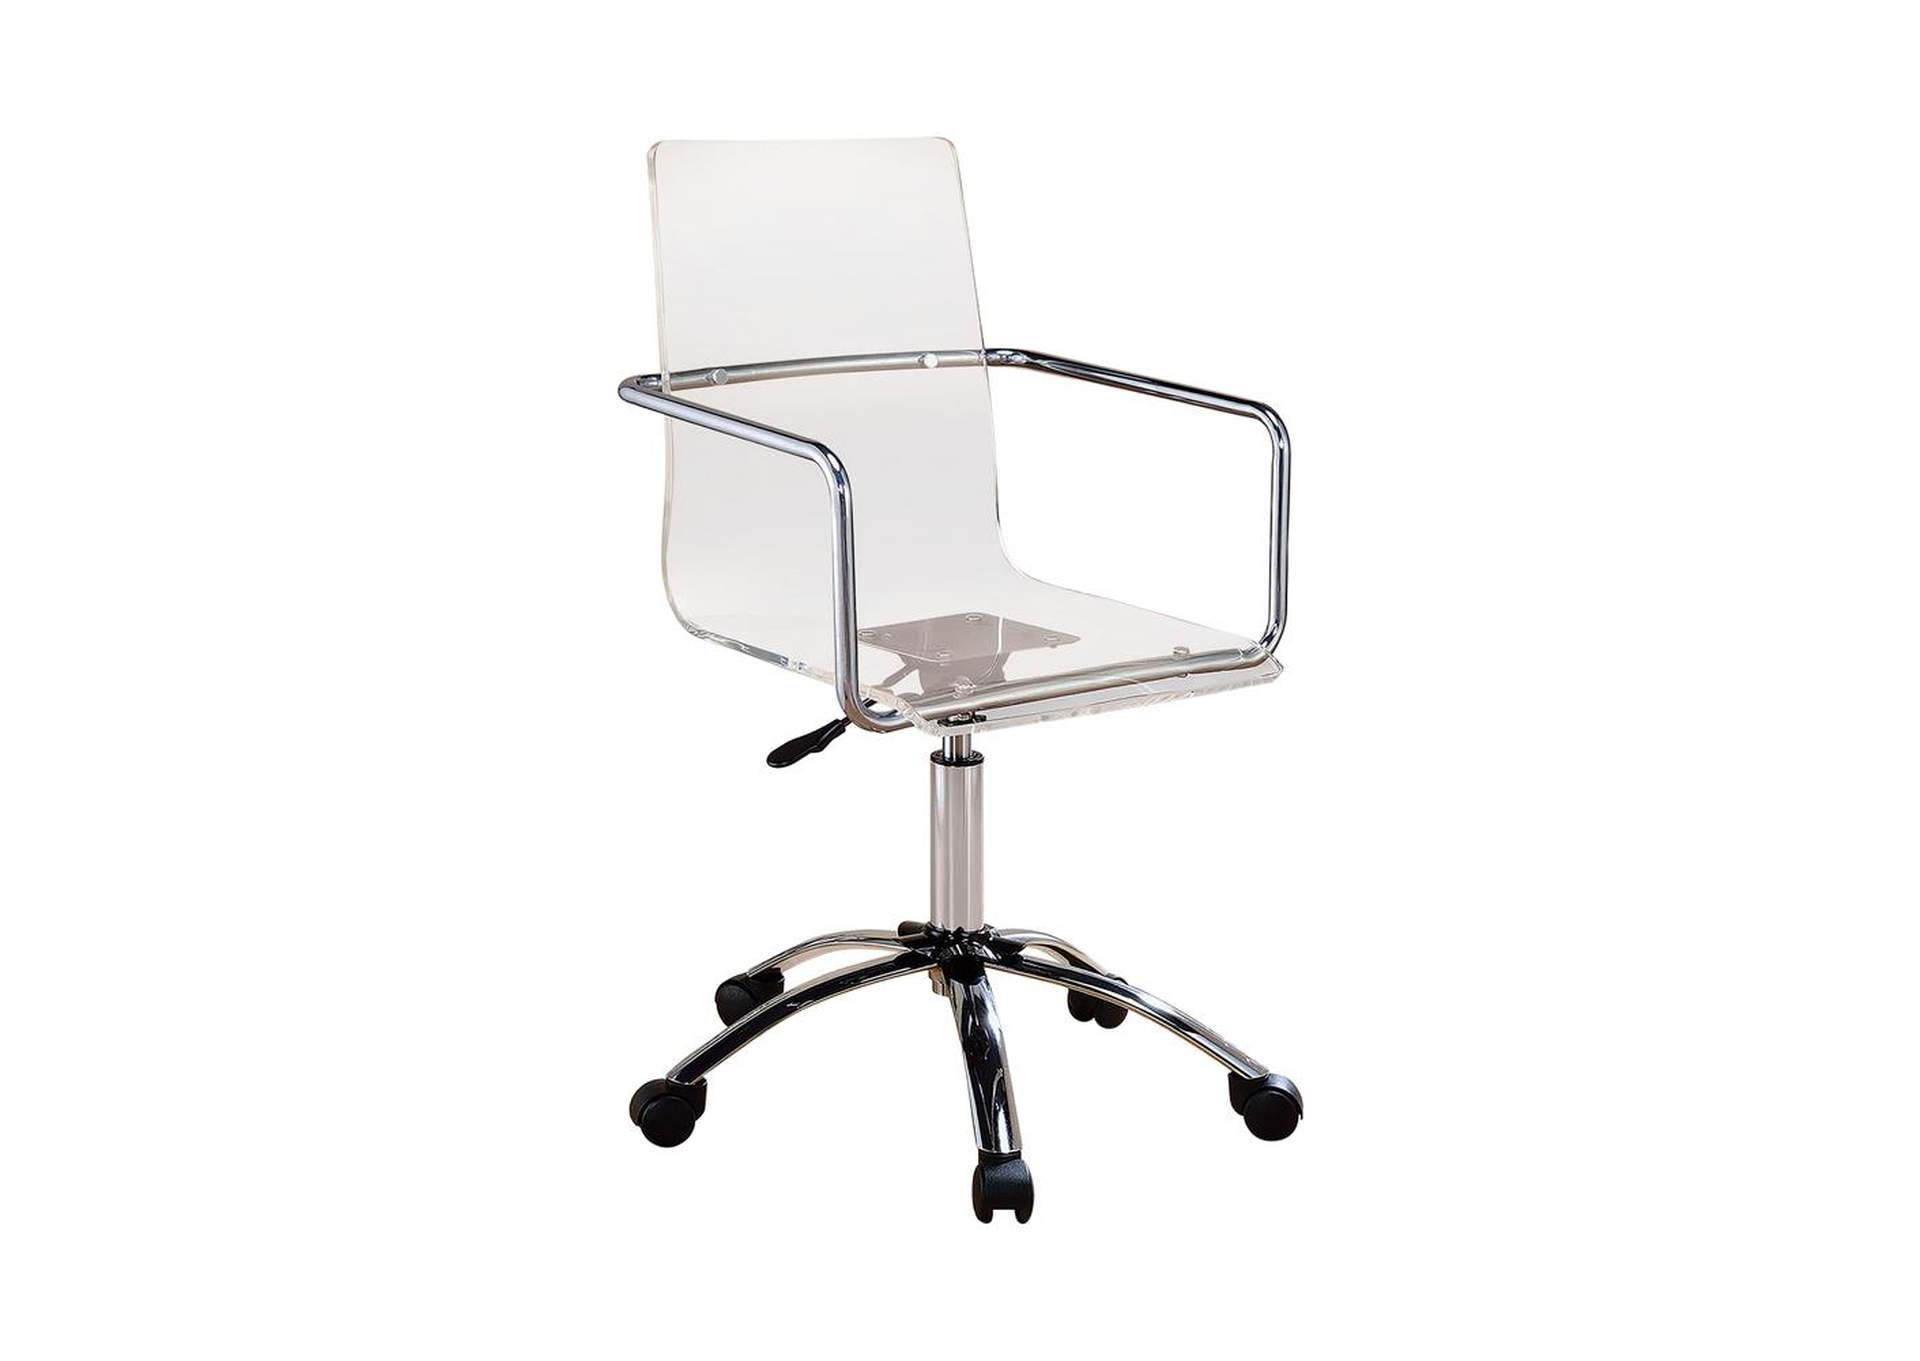 Clear Acrylic Contemporary Clear Acrylic Office Chair Best Buy Furniture And Mattress